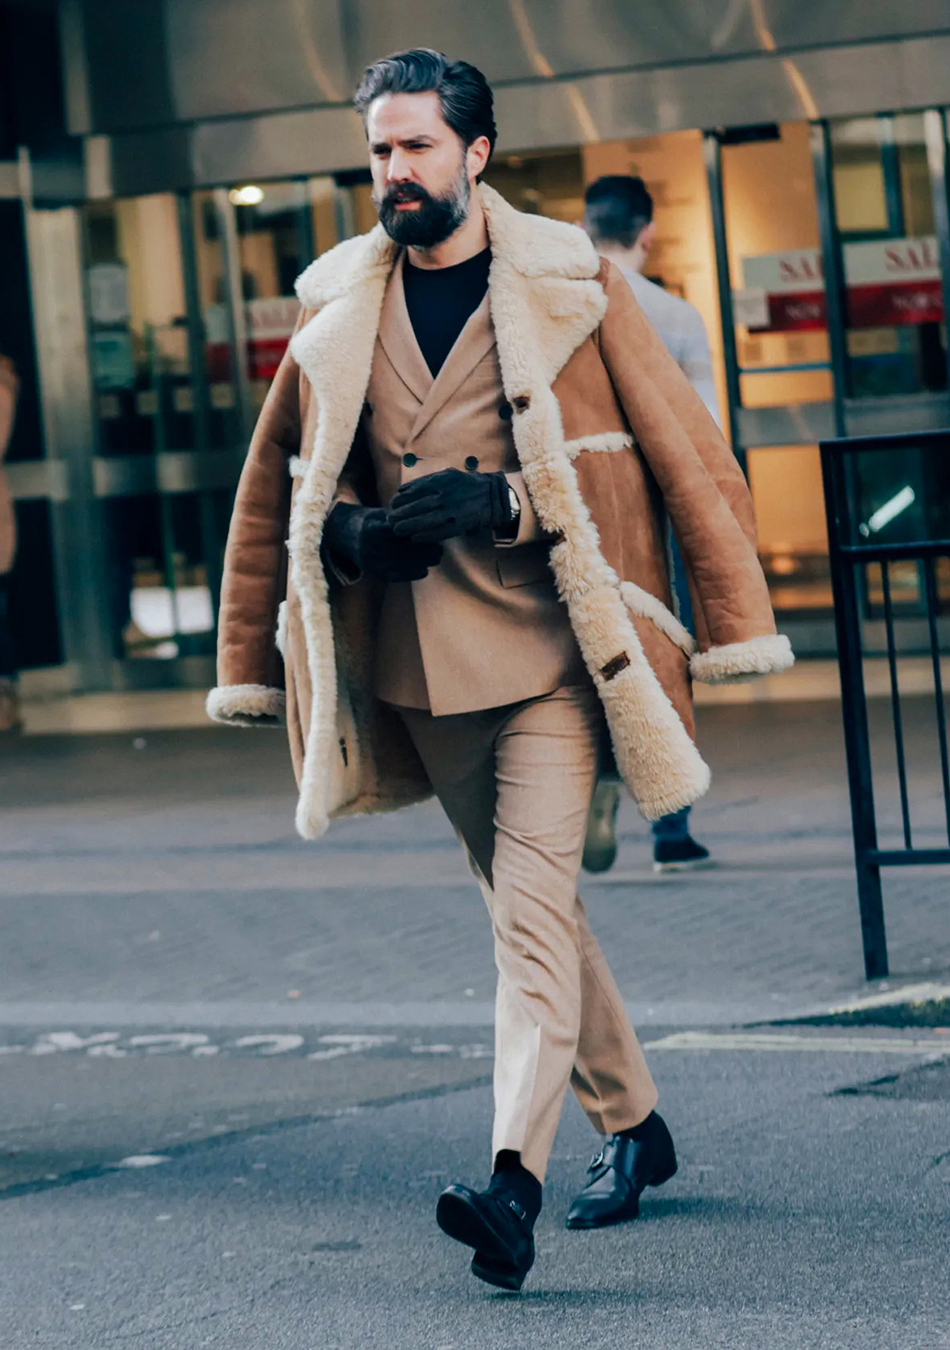 Winter jacket over a tan double-breasted suit